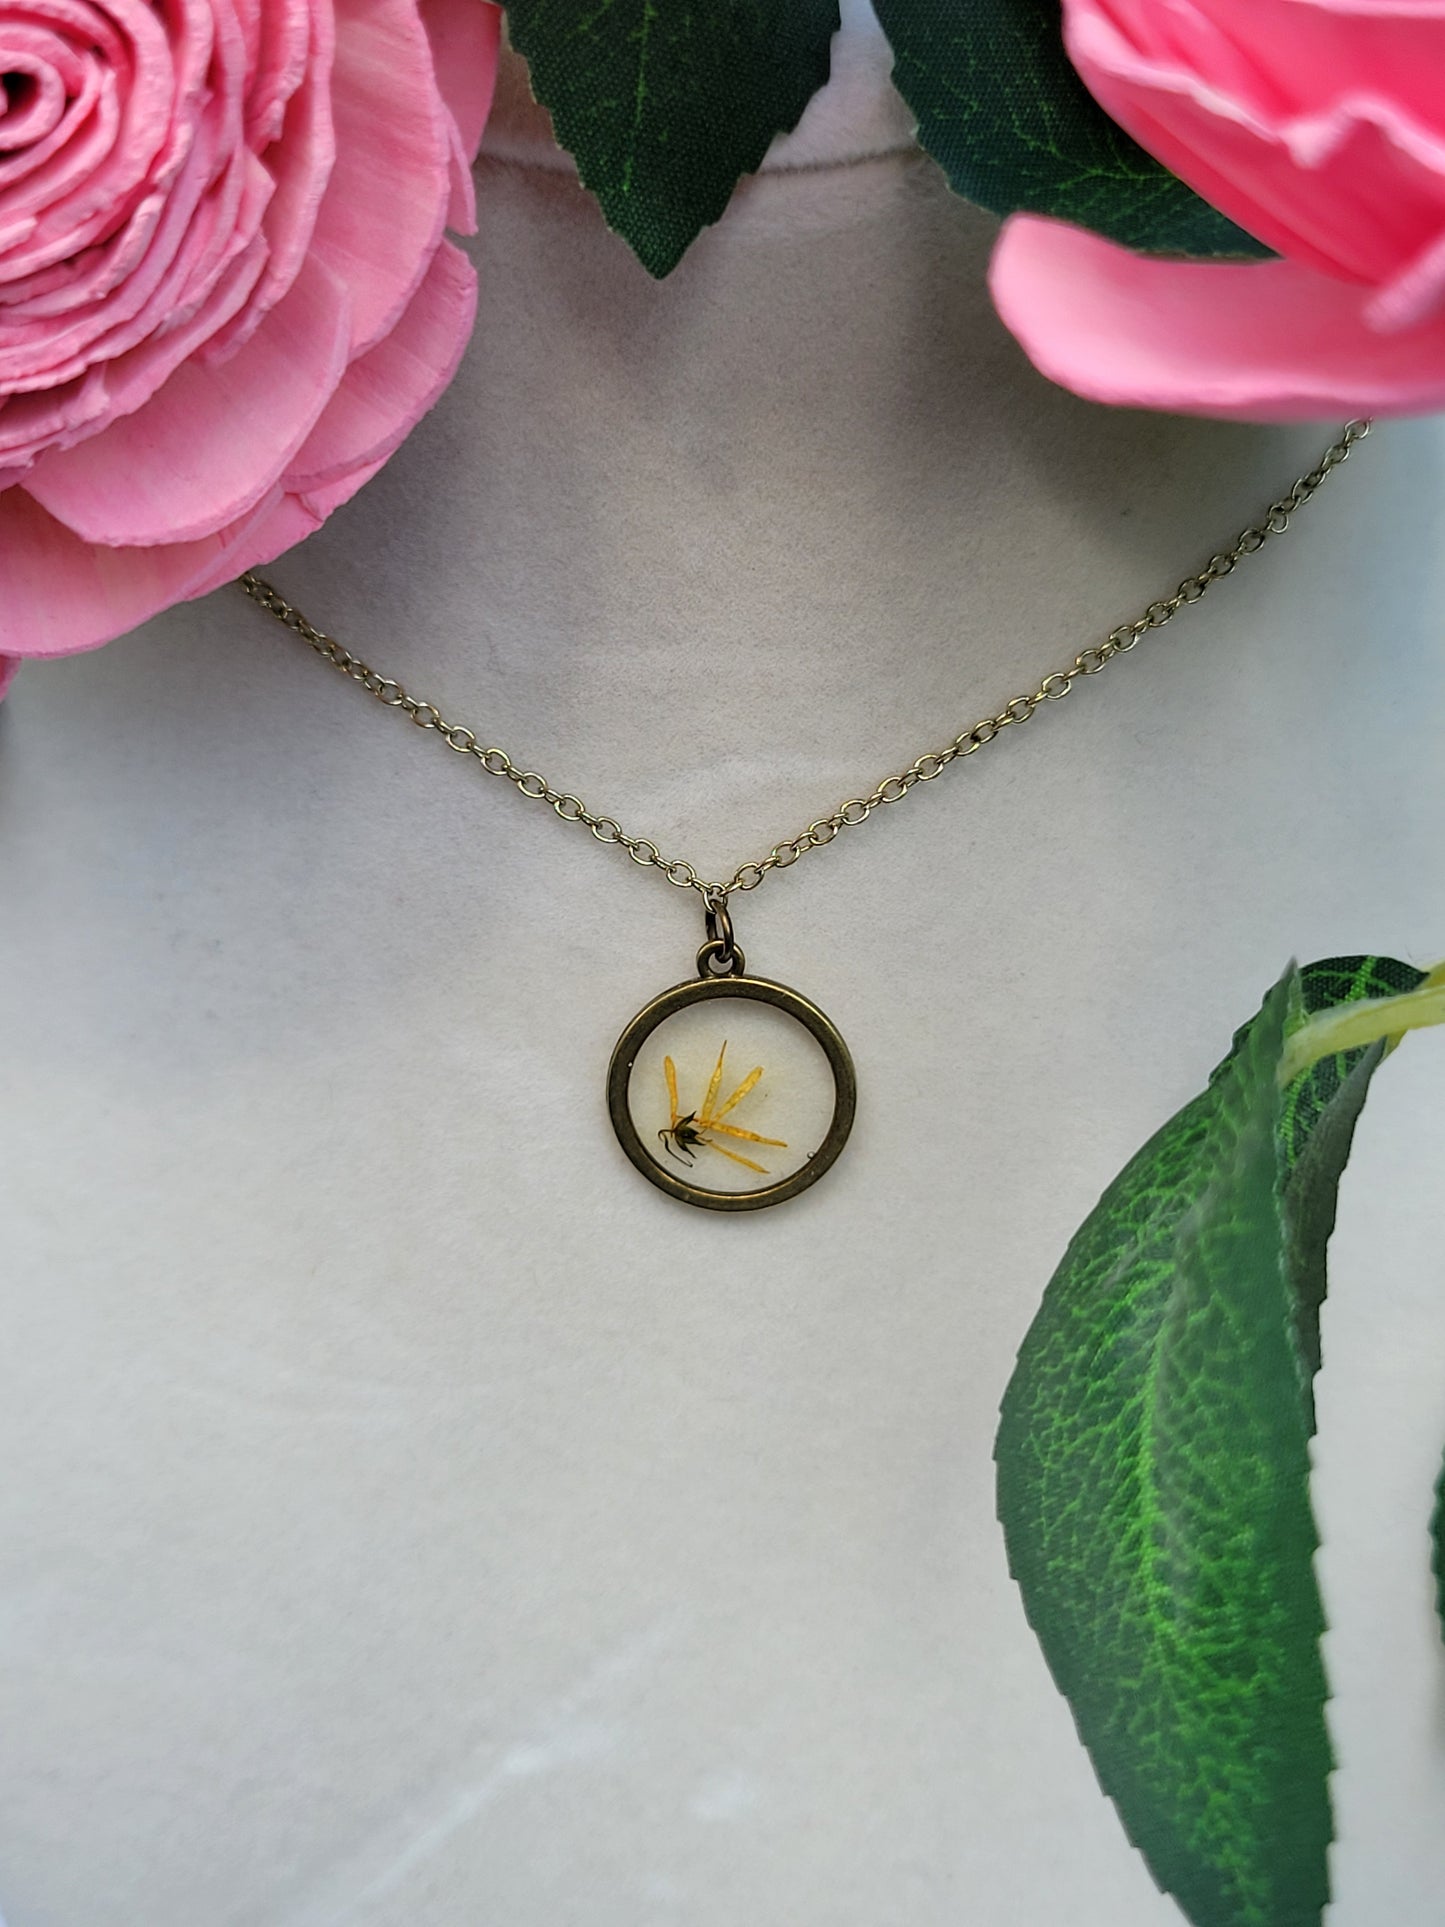 Yellow Floral Necklace